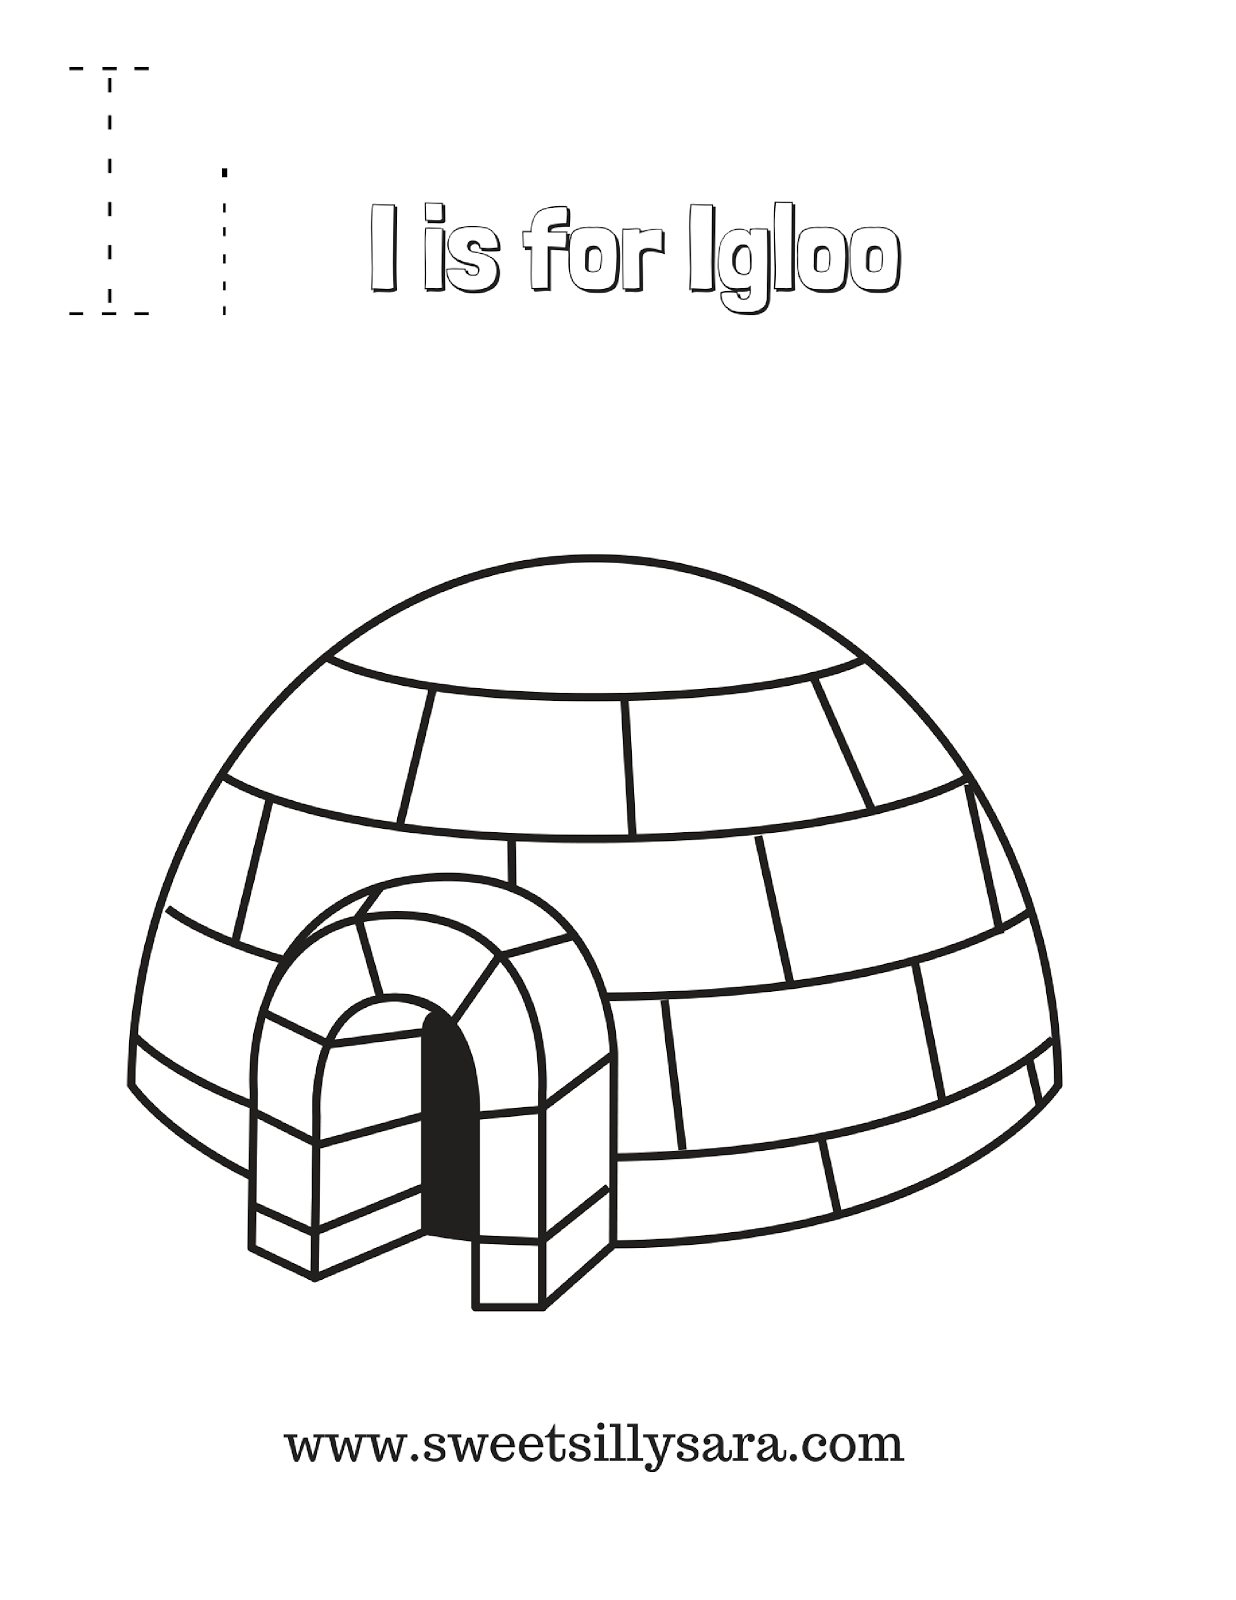 Download Crafting Reality with Sara: Print the I is for Igloo ...